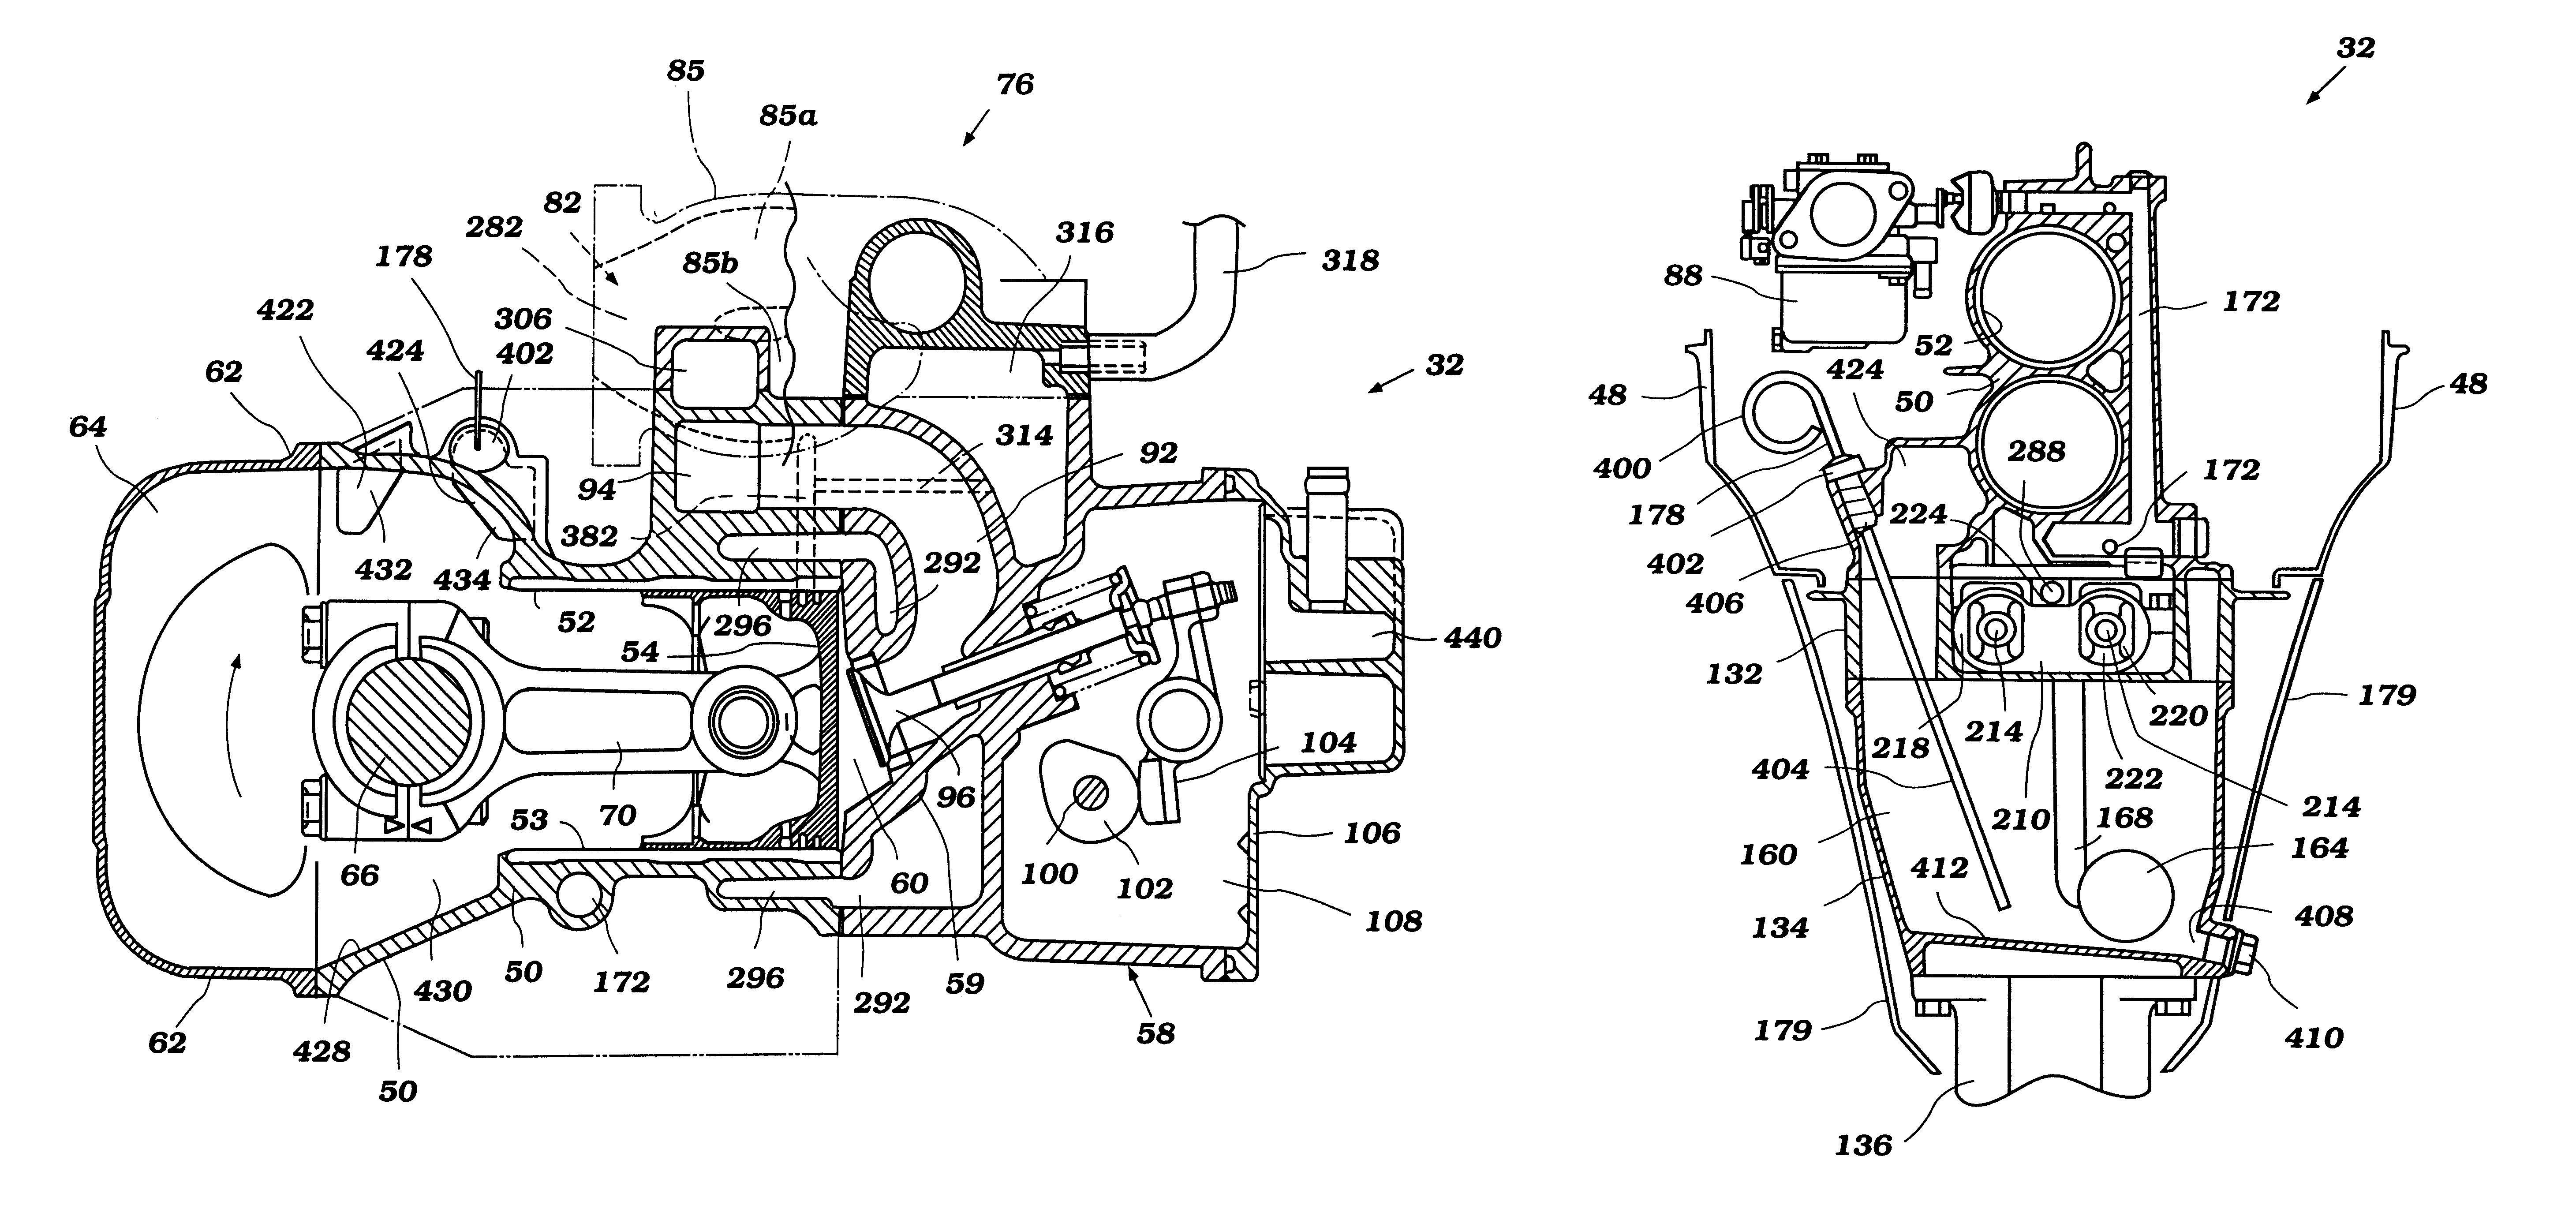 Engine layout for outboard motor